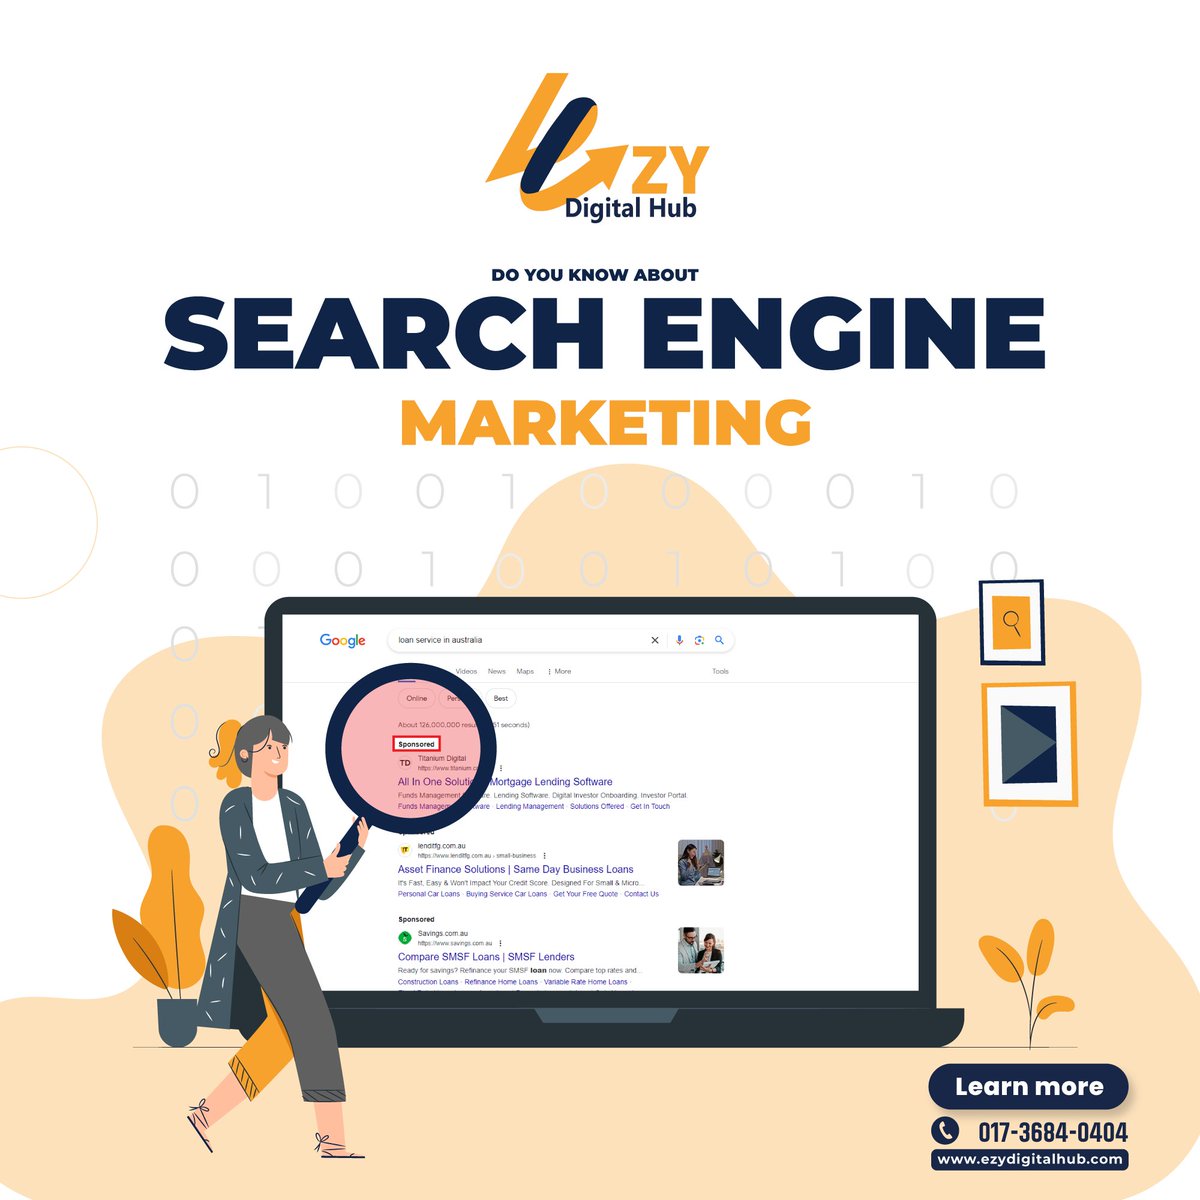 🚀Boost your online presence with Search Engine Marketing (SEM)!

Call us at 01736840404 or visit our website ezydigitalhub.com for more information.

#SEM #SearchEngineMarketing #DigitalMarketing